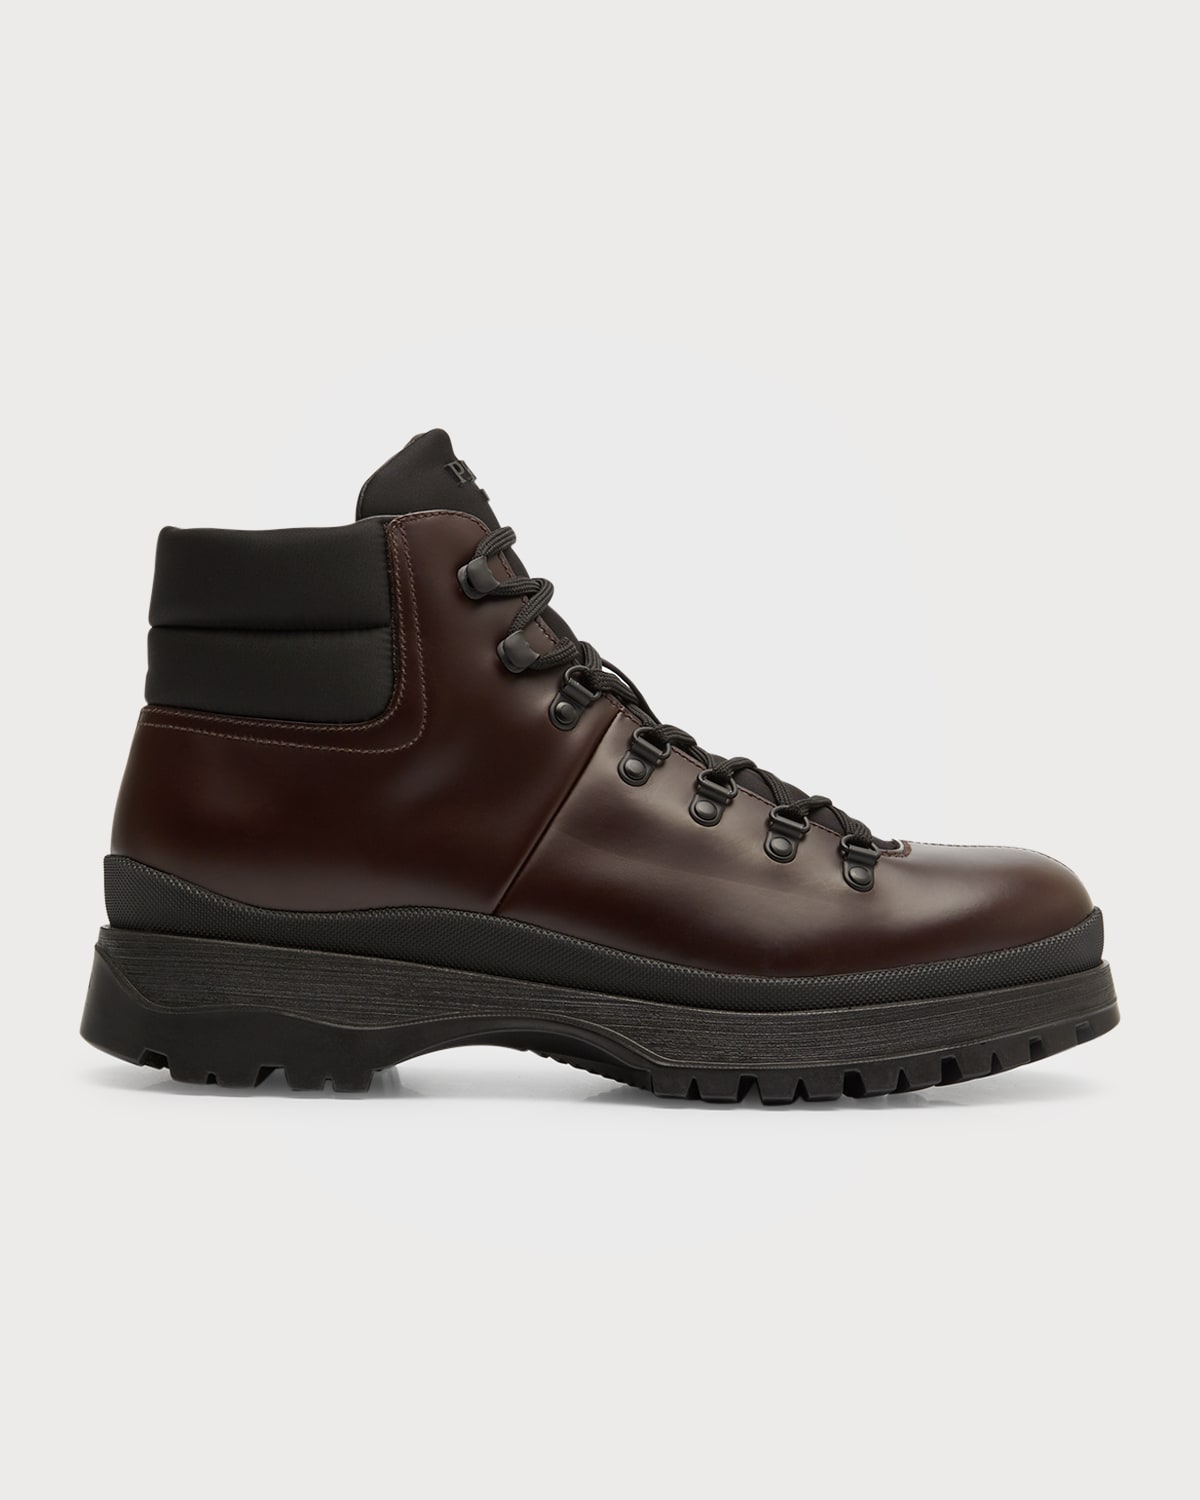 PRADA MEN'S BRUCCIATO LEATHER LACE-UP HIKING BOOTS